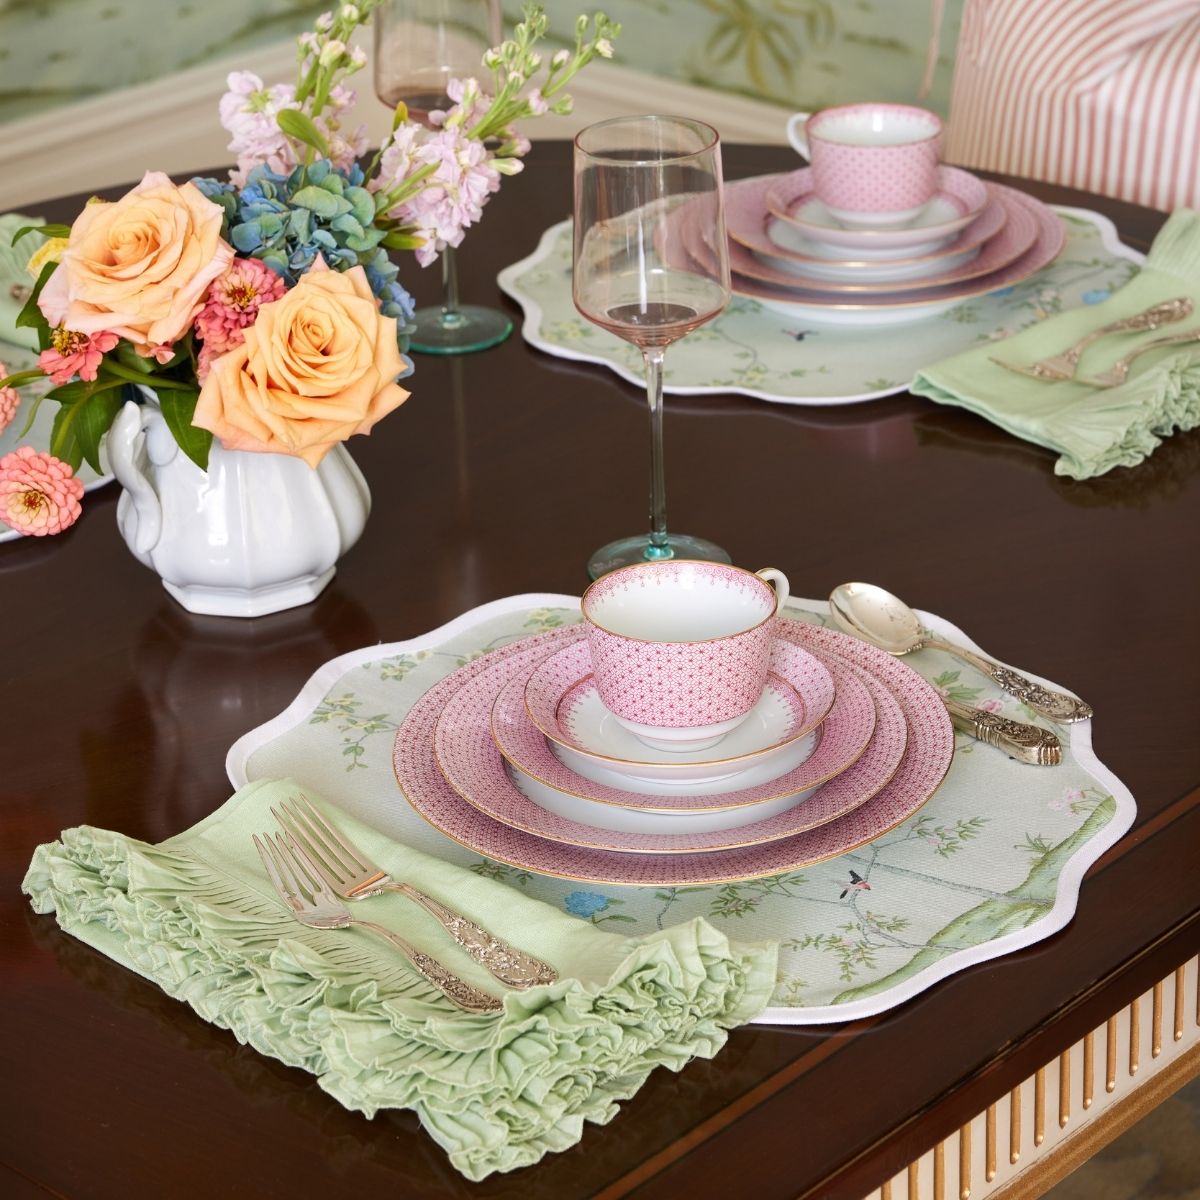 Rose Lace 5 Piece Place Setting